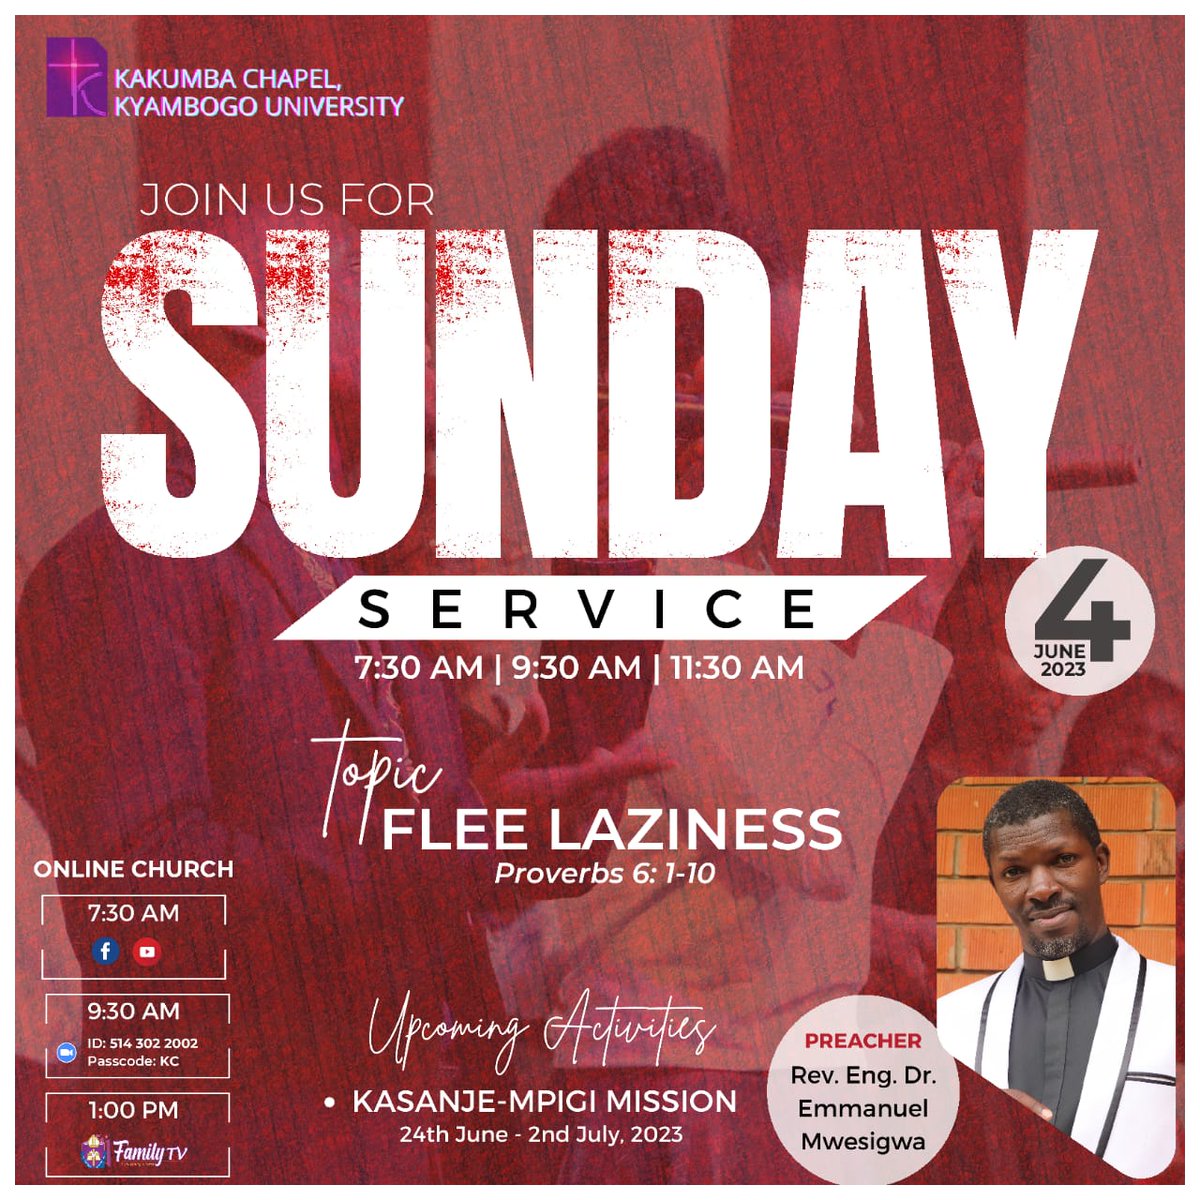 SUNDAY SERVICE @ 7:30am, 9:30 am also on zoom, 11:30am With Rev. Eng. Dr. Emmanuel Mwesigwa Topic: Flee Laziness Zoom link us02web.zoom.us/j/5143022002?p… Meeting ID: 514 302 2002 Passcode: KC.